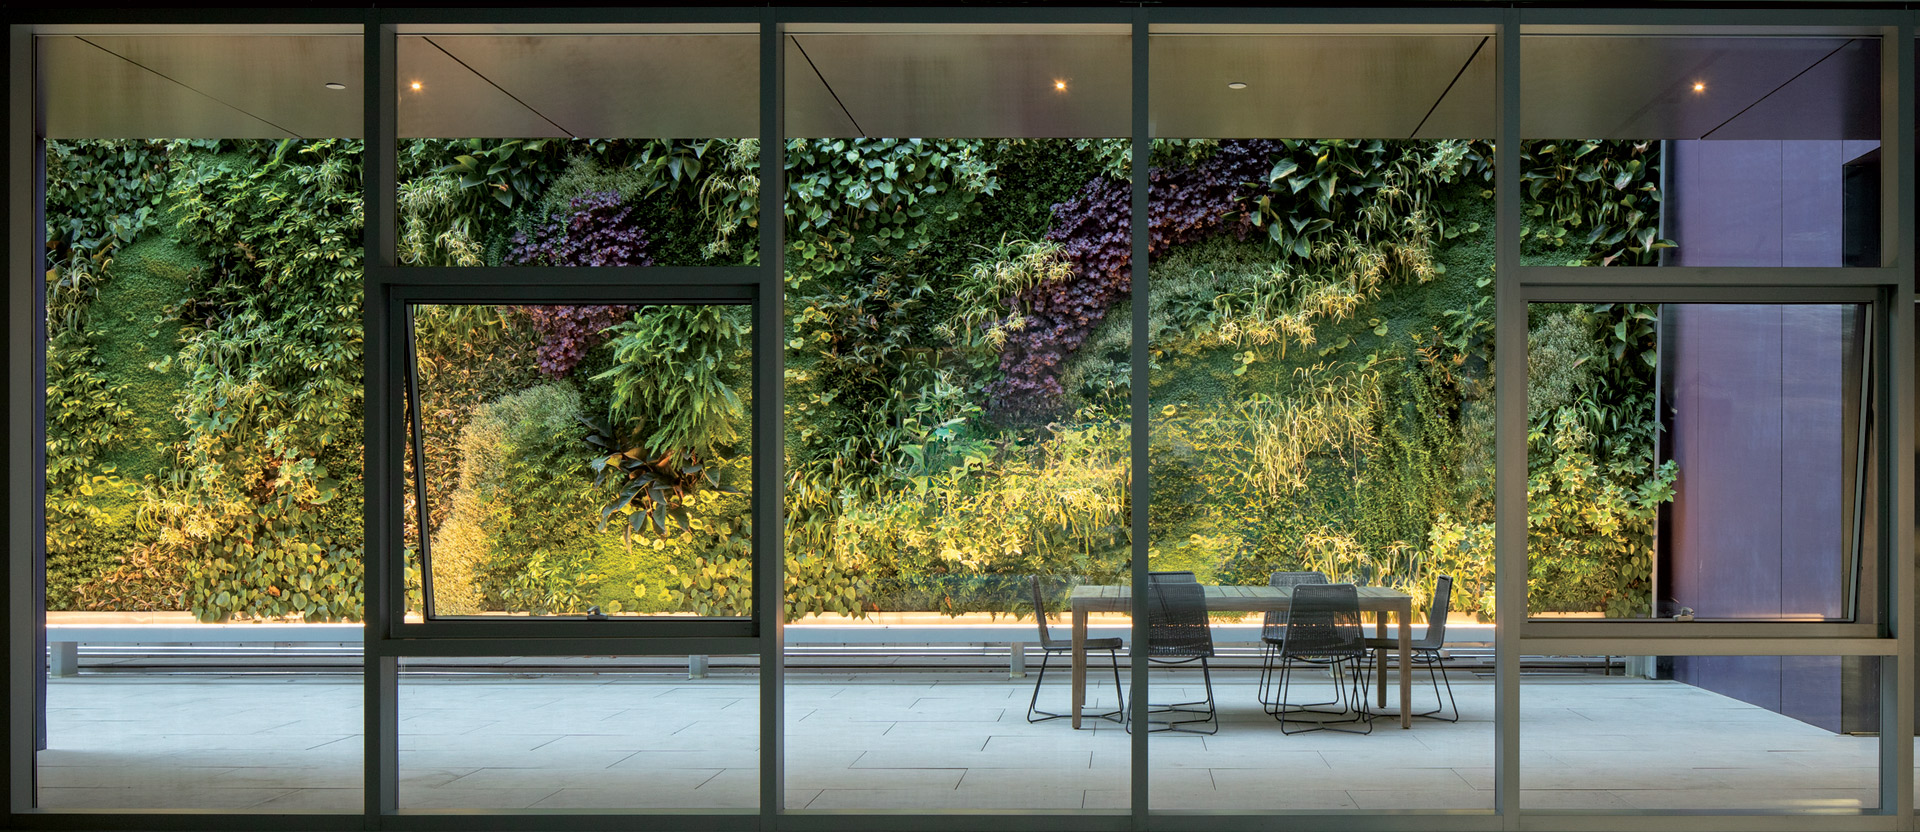 Spacious dining area with floor-to-ceiling glass walls, overlooking a vibrant vertical garden. Sleek furniture contrasts with lush greenery, under soft, ambient lighting for a natural, contemporary atmosphere.